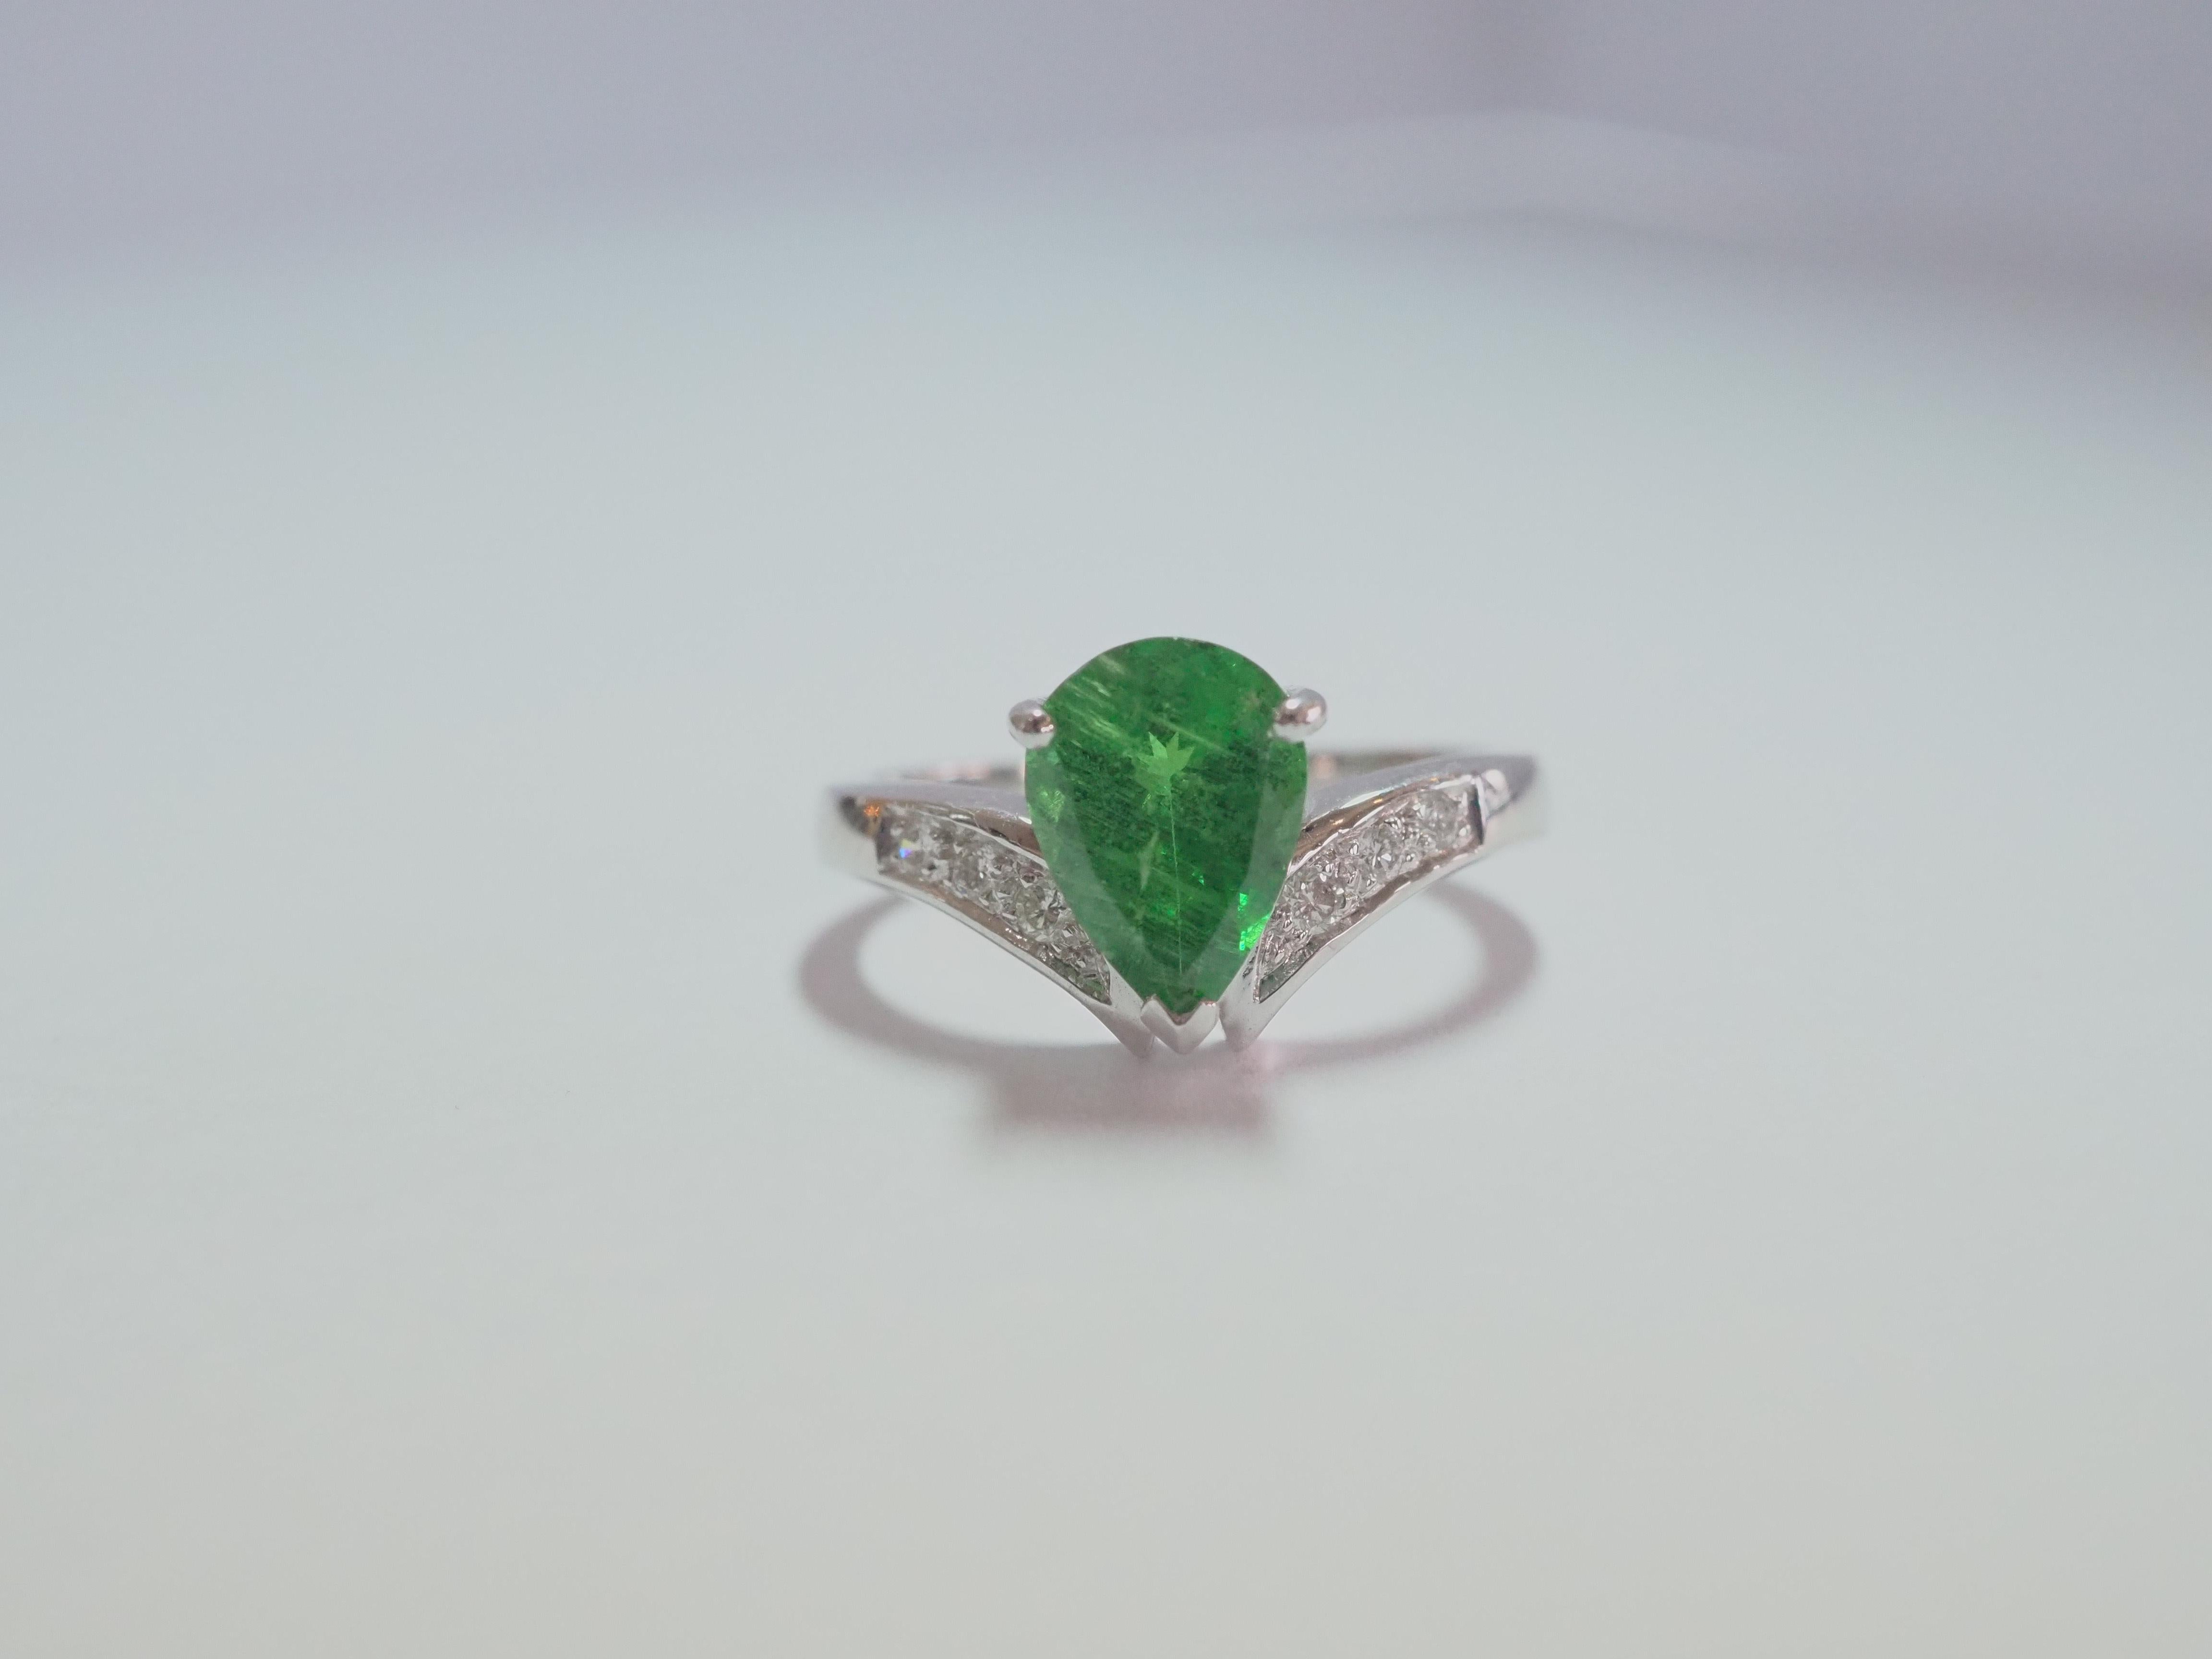 This beautiful engagement ring is perfect for all woman and also suitable for man, especially for those who loves refractive green stones will love the tsavorite. Those who loves green stones may often choose the famous emerald as their first